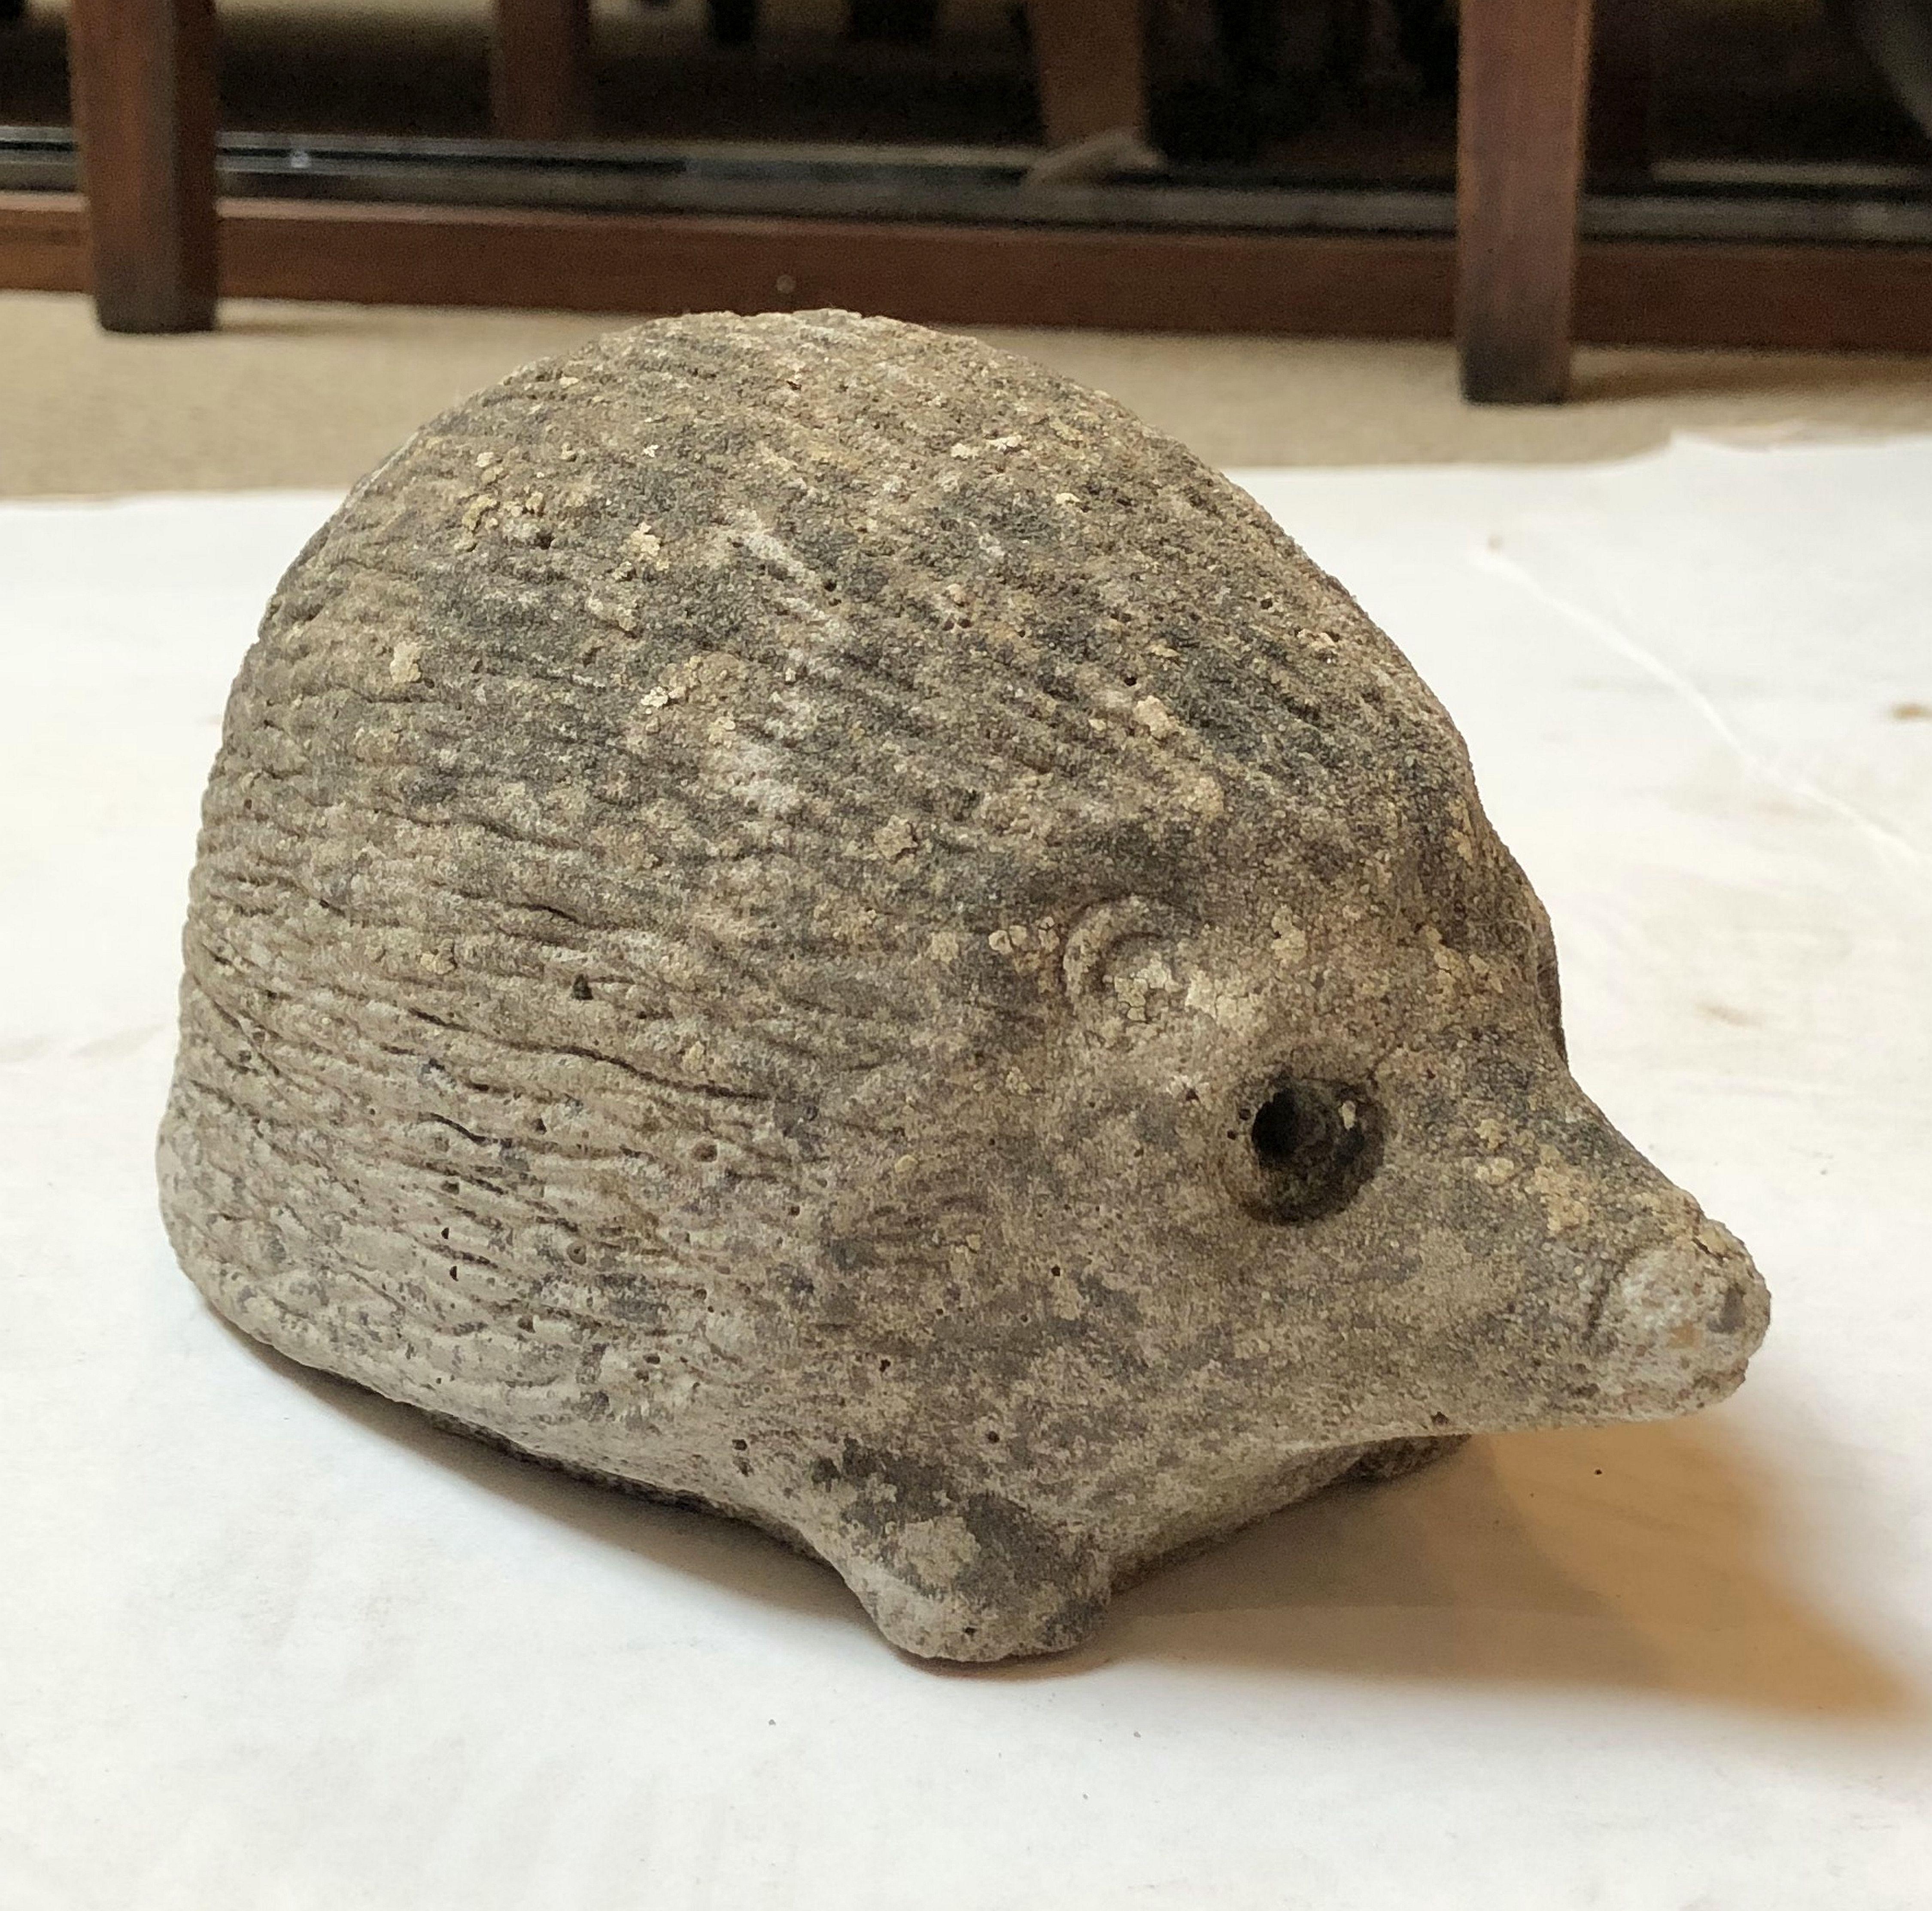 A handsome English garden statue figure of a hedgehog, of composition stone, with excellent in the round modeling.

Perfect for a garden room or conservatory.

 